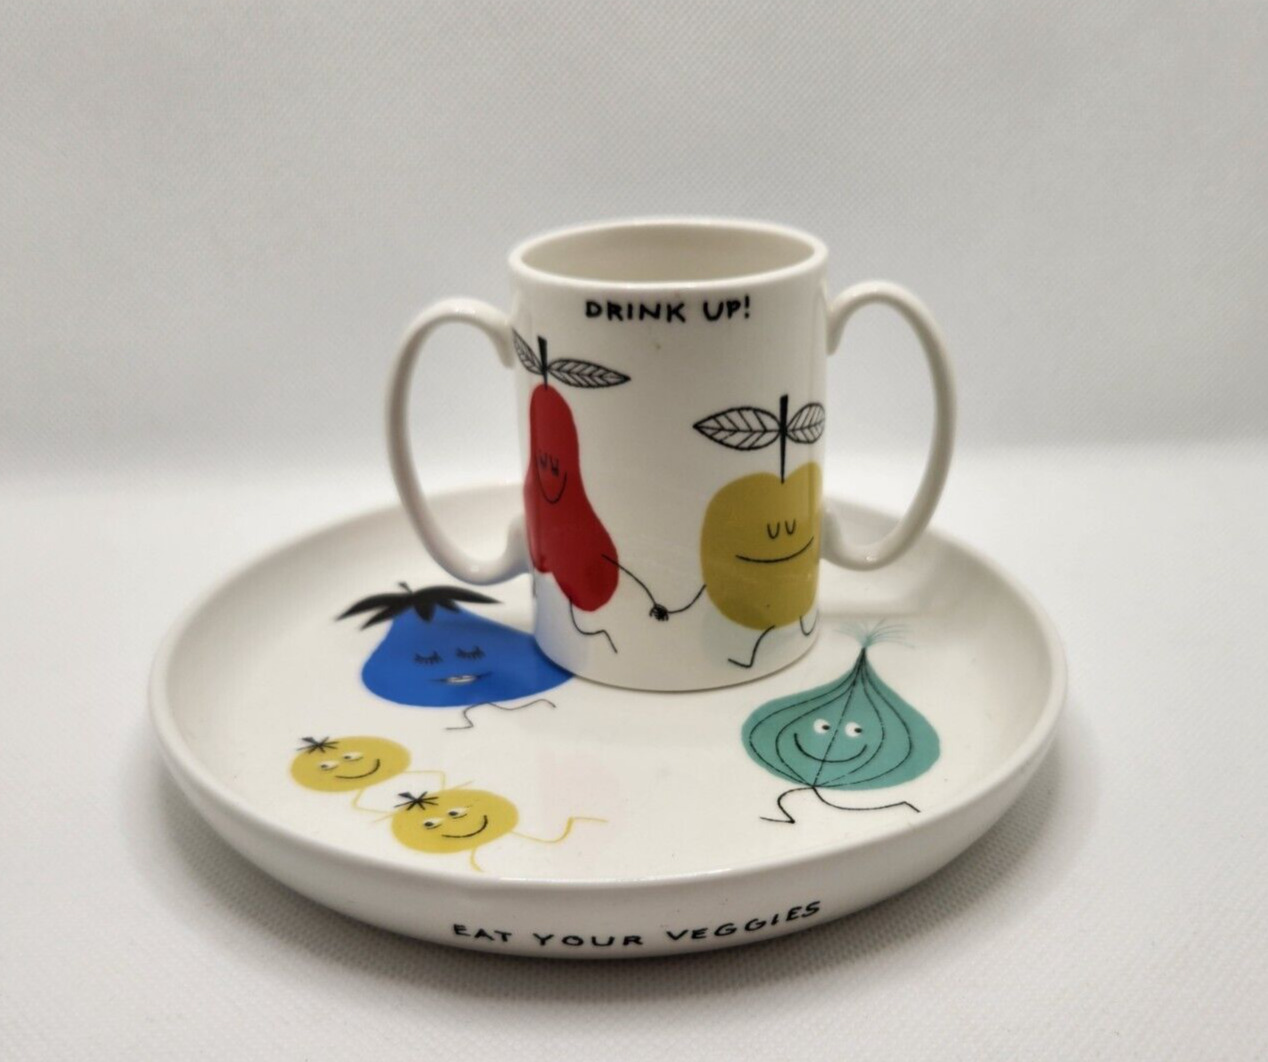 Anthropomorphic Veggies Kate Spade Crunch Bunch Childs Plate Cup Set by Lenox